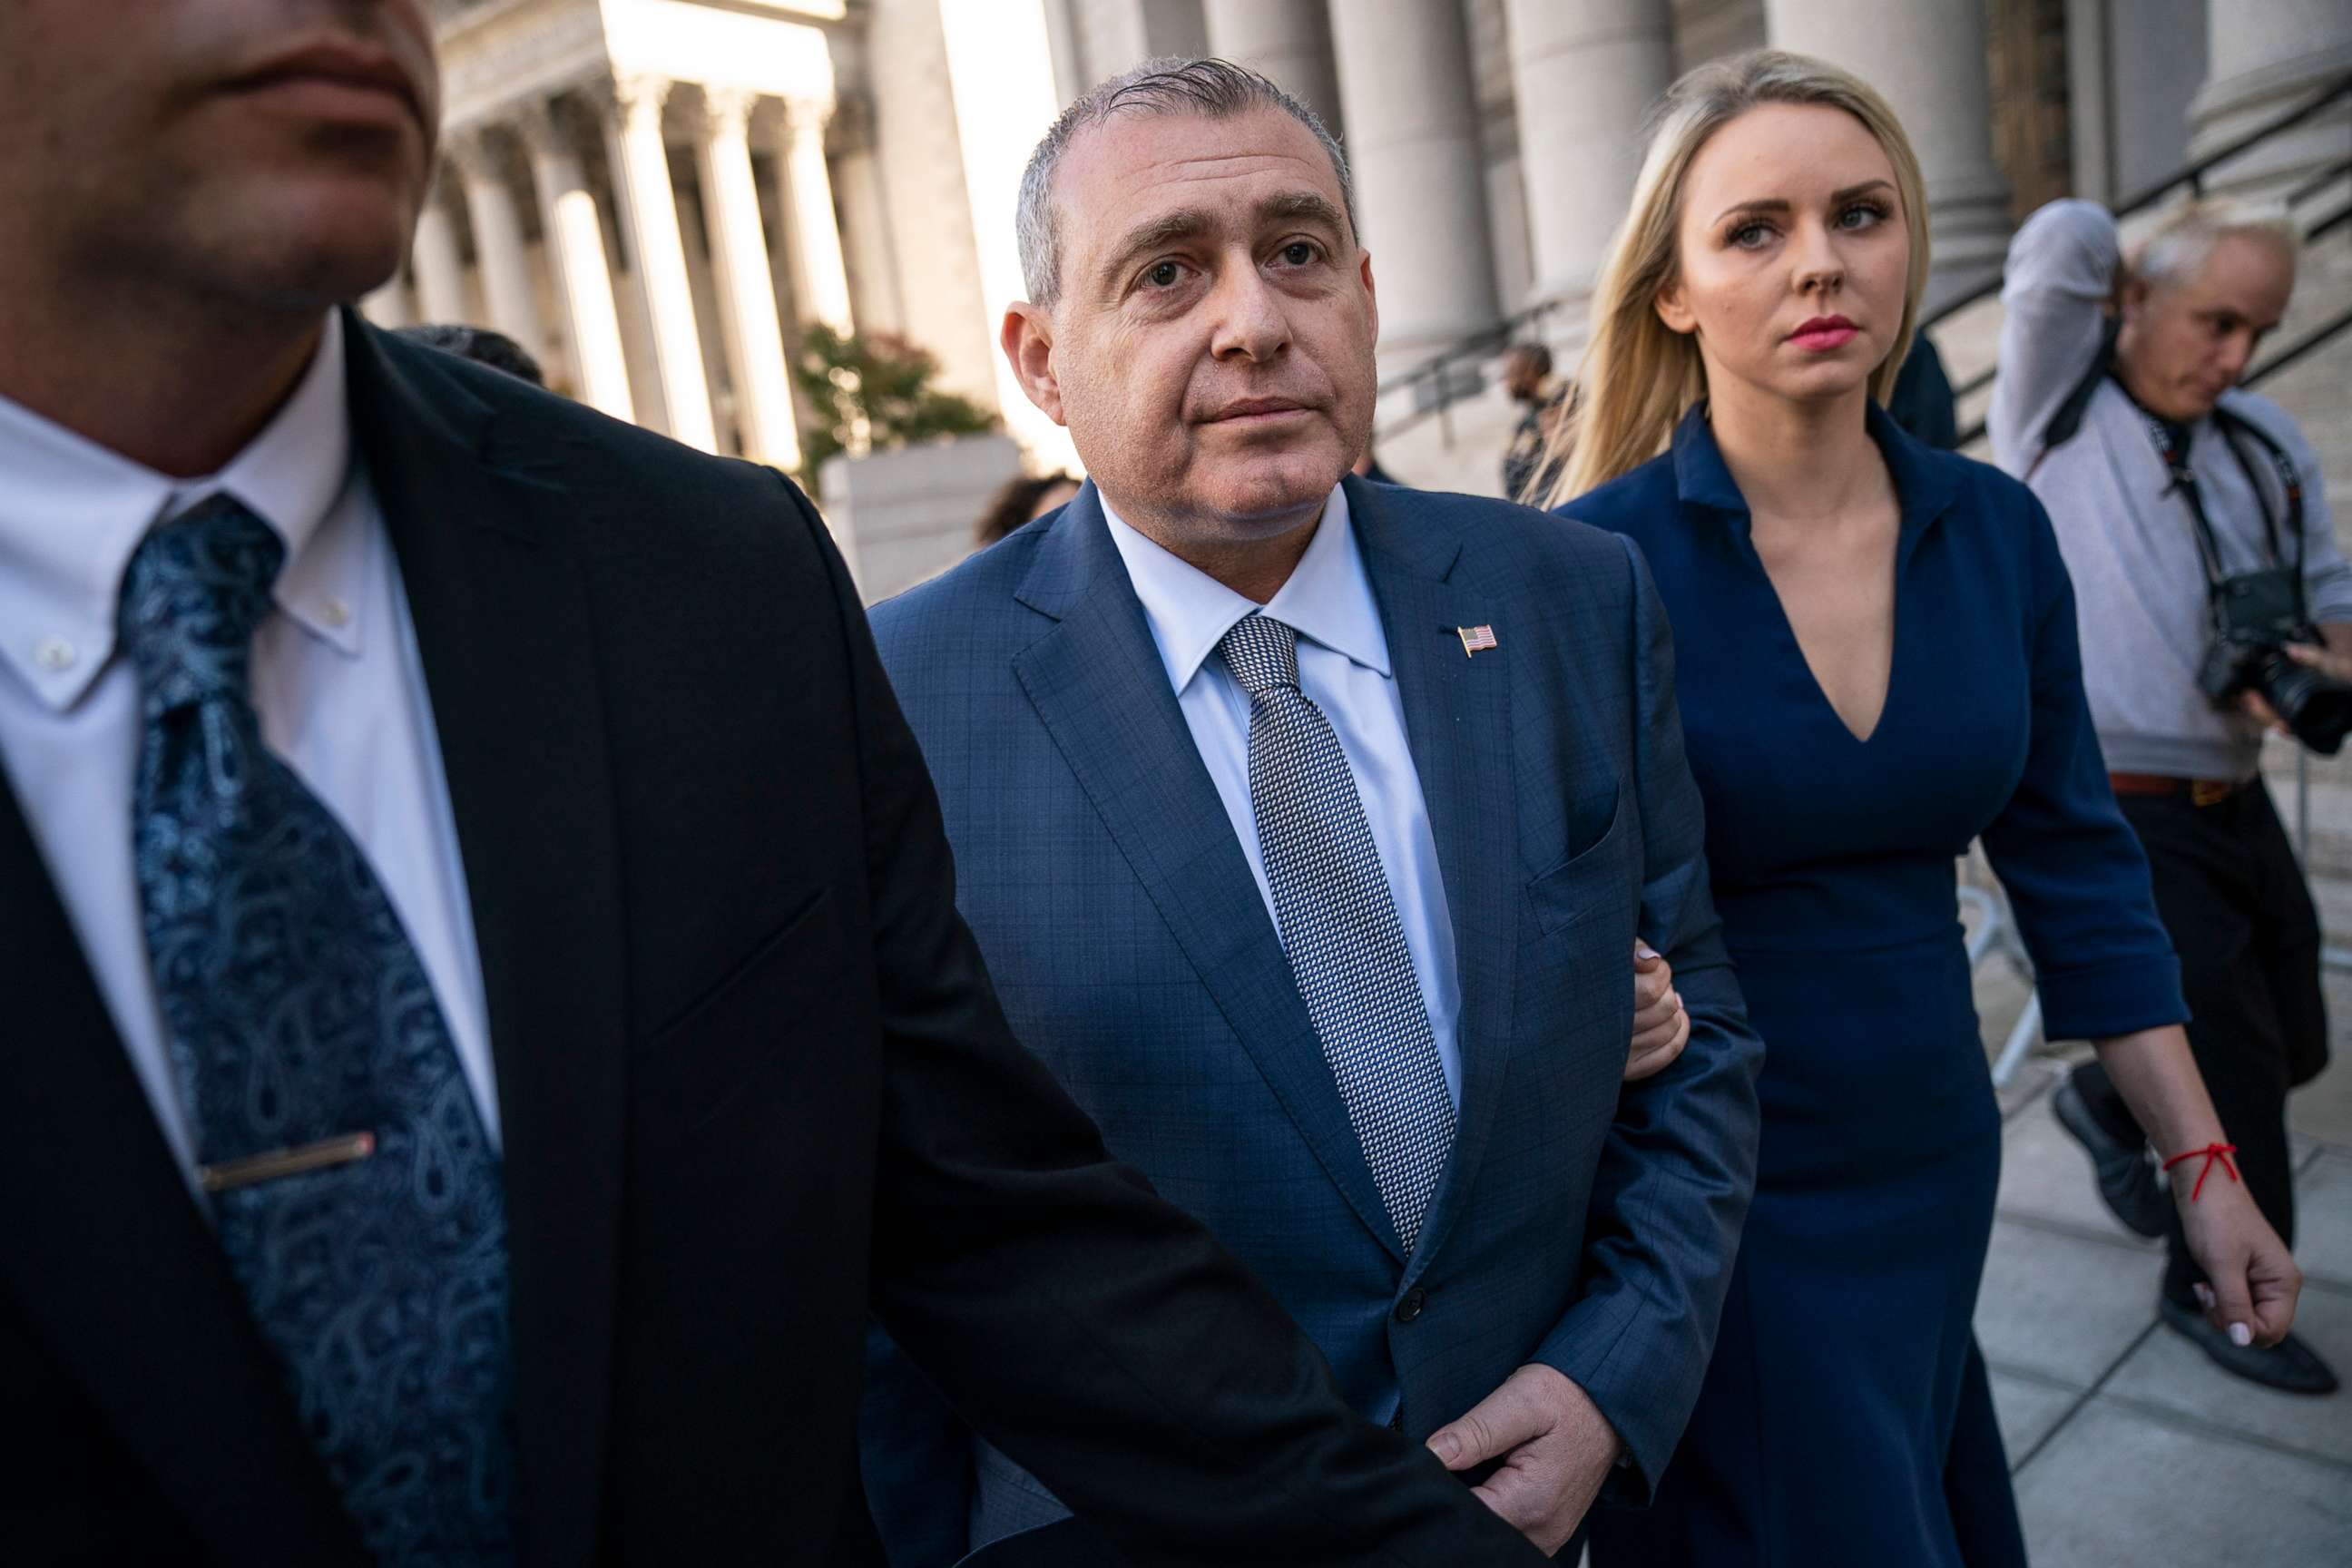 PHOTO: Lev Parnas and his wife Svetlana Parnas depart federal court following an arraignment hearing, Oct. 23, 2019, in New York.